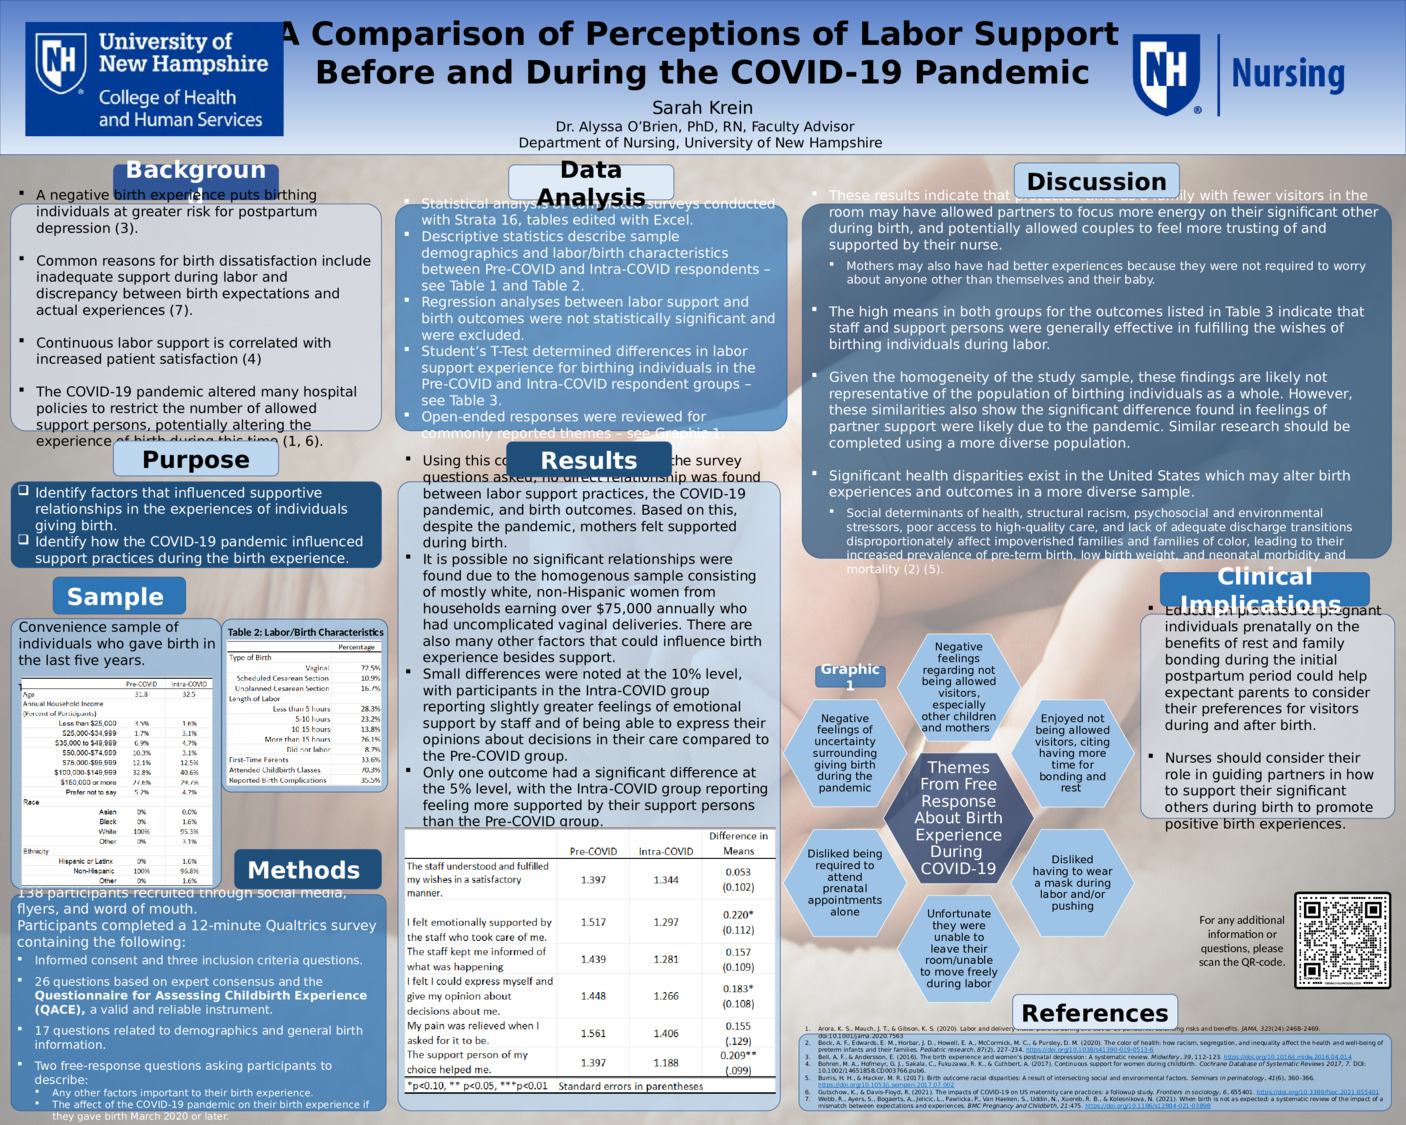 A Comparison Of Perceptions Of Labor Support Before And During The Covid-19 Pandemic by sgkrein